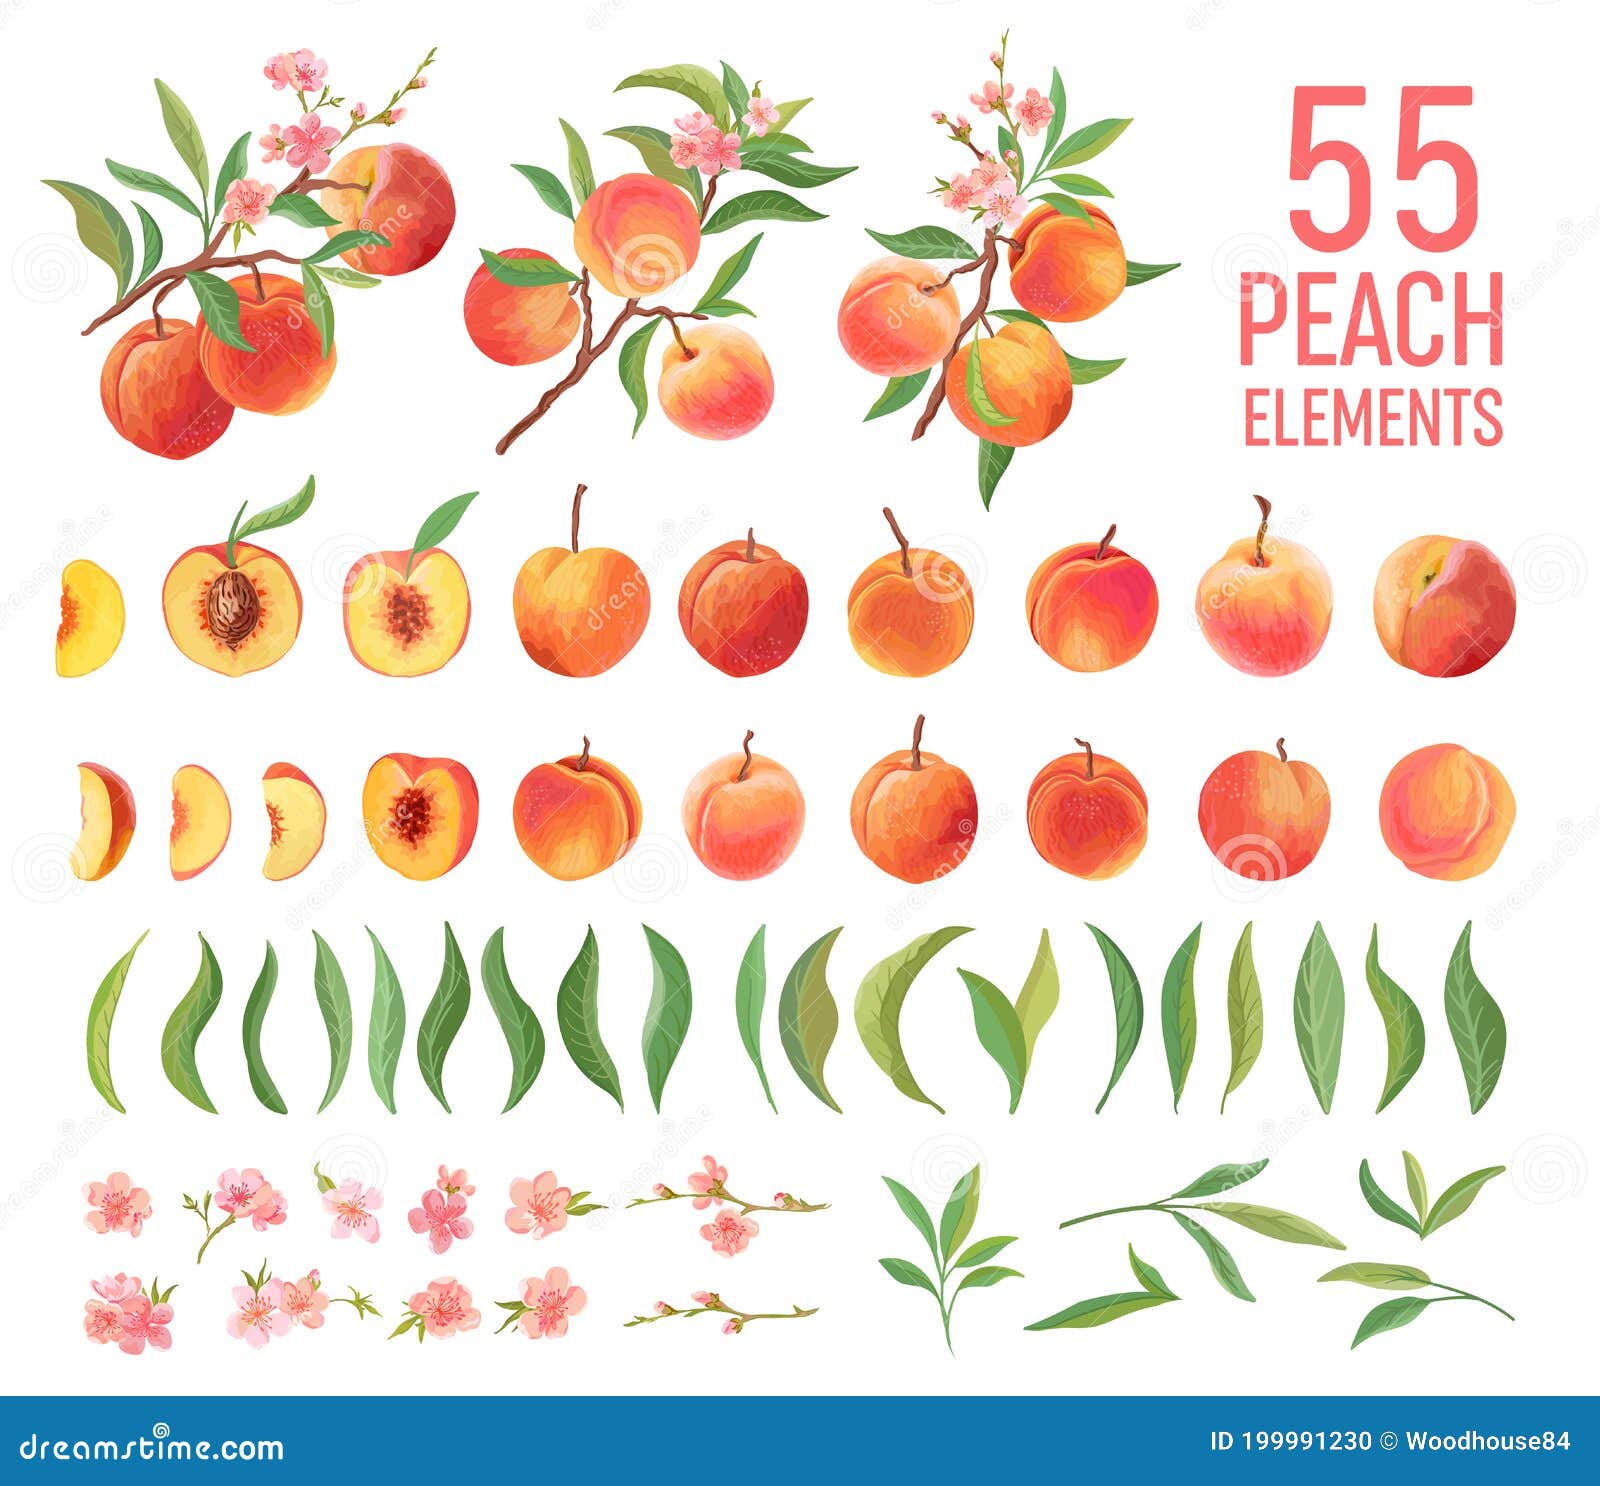 peach fruit watercolor  set.  peaches collection of fruits, leaves, slices on white